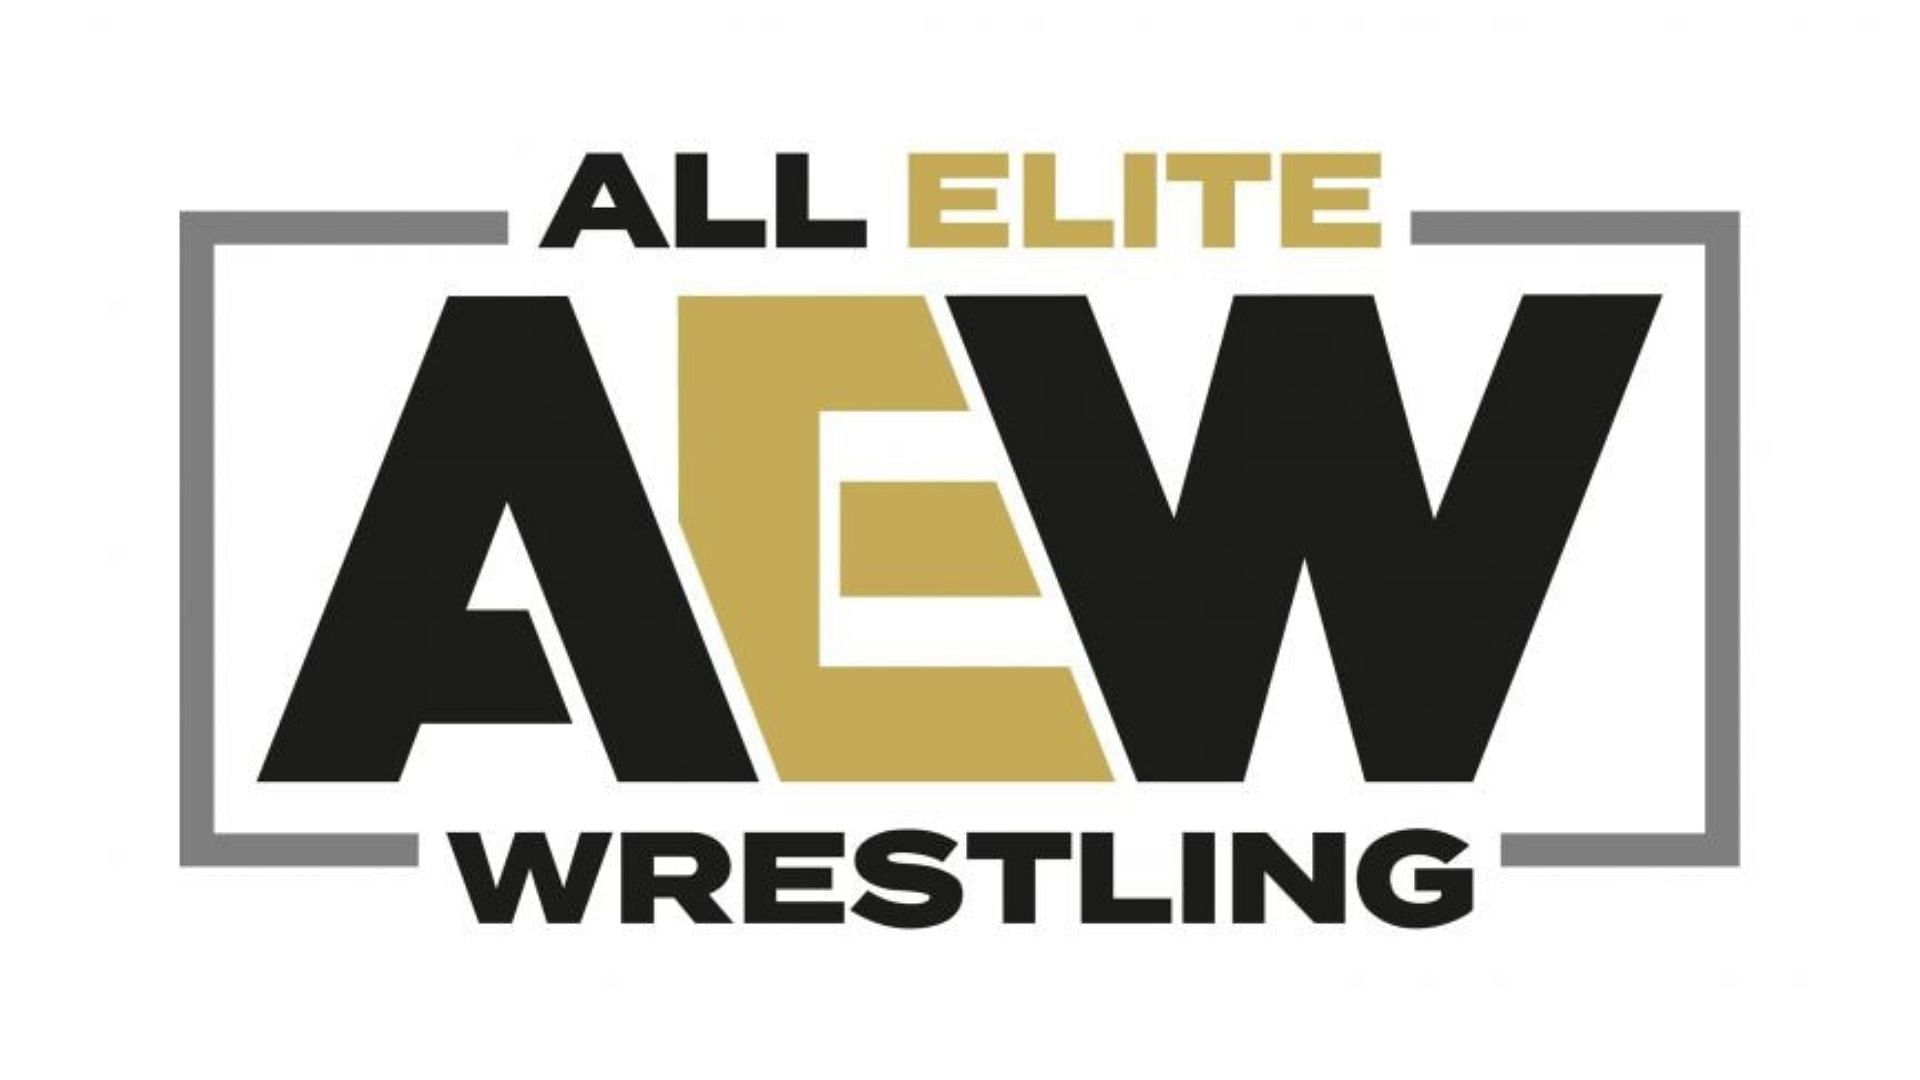 All Elite Wrestling is one of the foremost wrestling promotions of the US